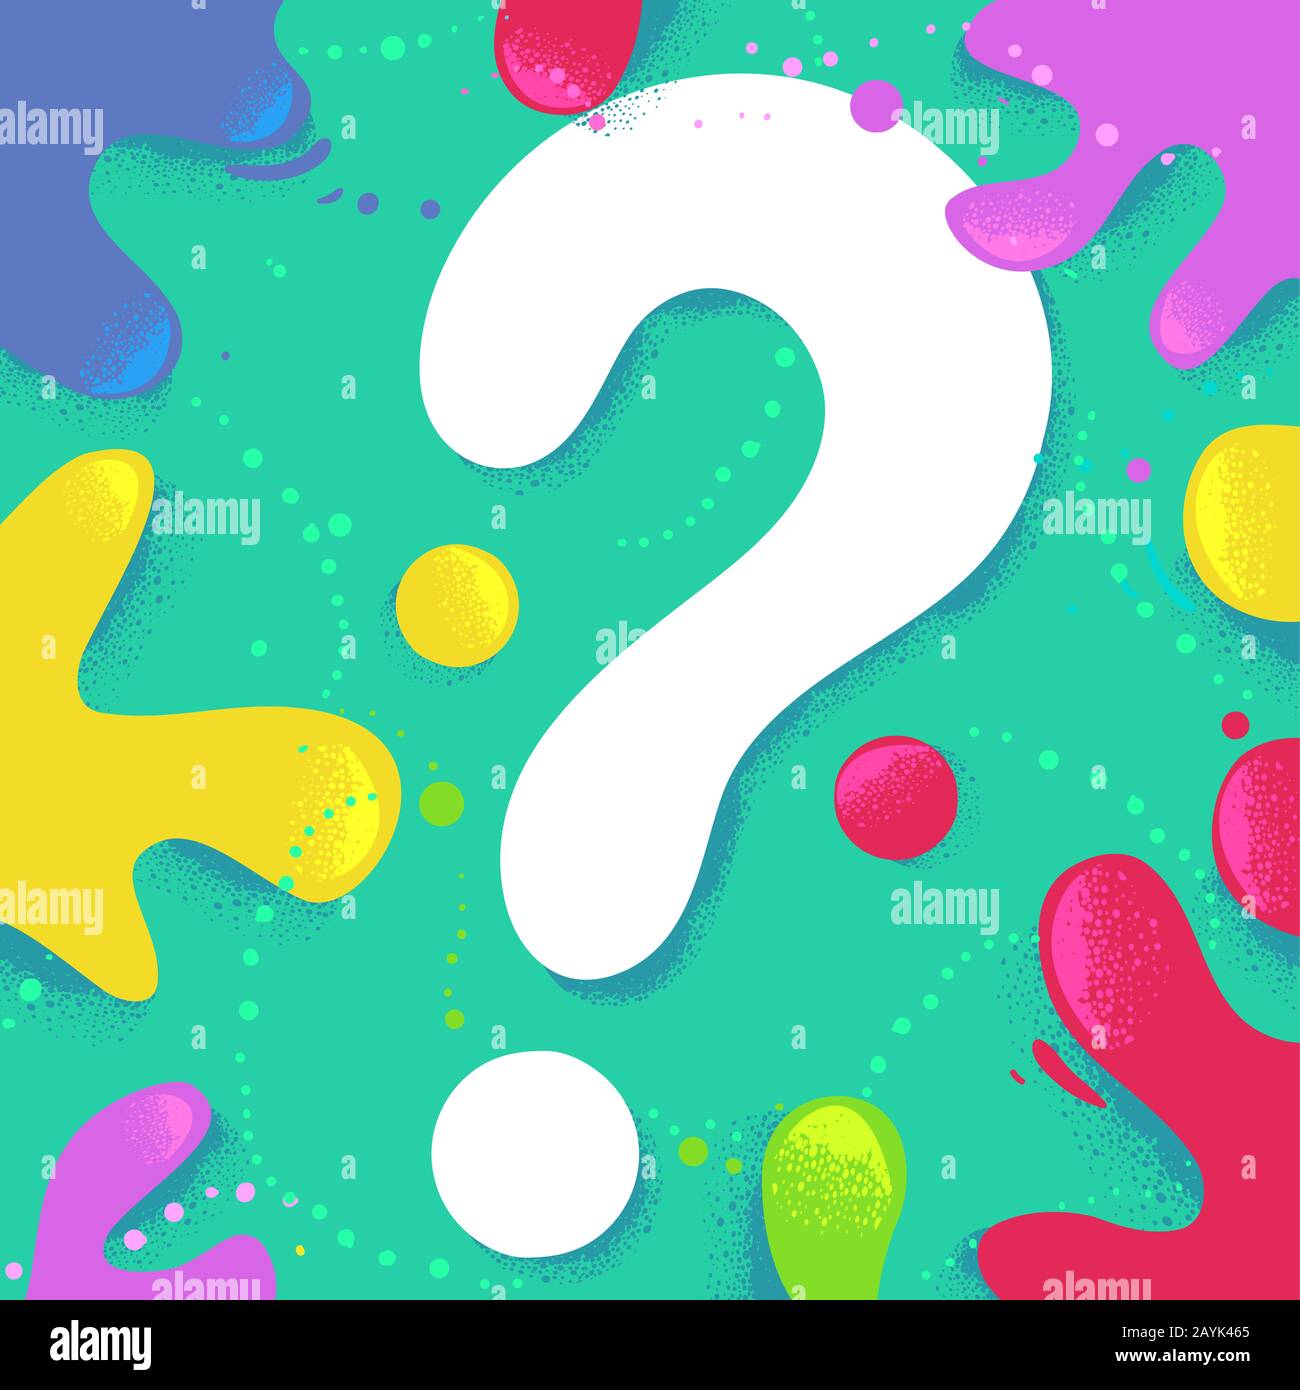 Illustration of a Question Mark with Paint Splats Around Stock Photo